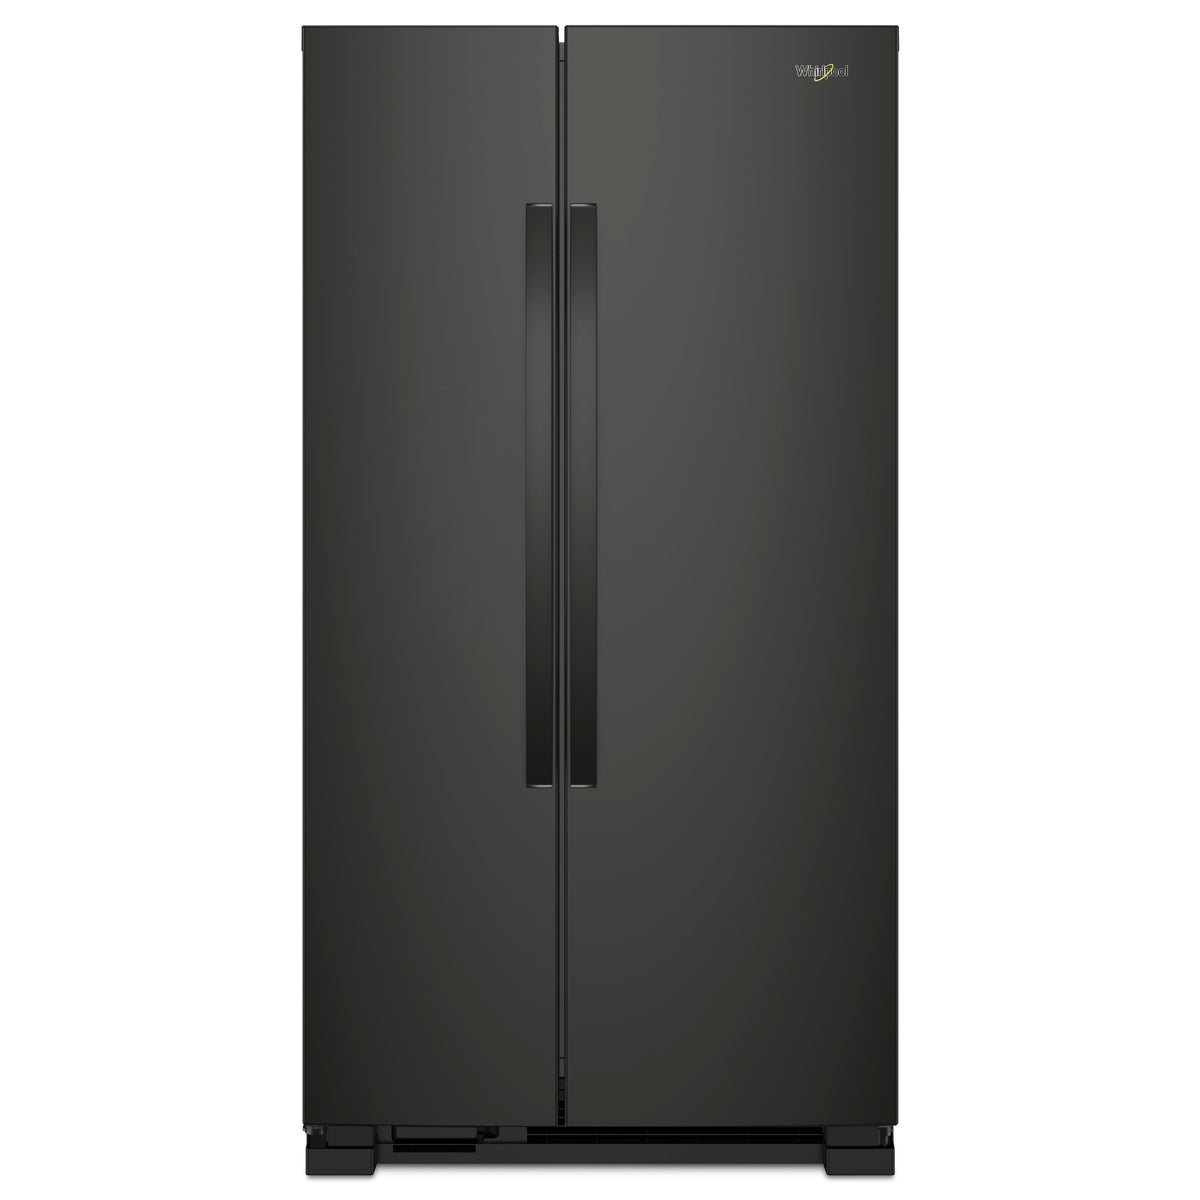 Whirlpool 36-inch, 25.1 cu. ft. Side-By-Side Refrigerator WRS315SNHB IMAGE 1